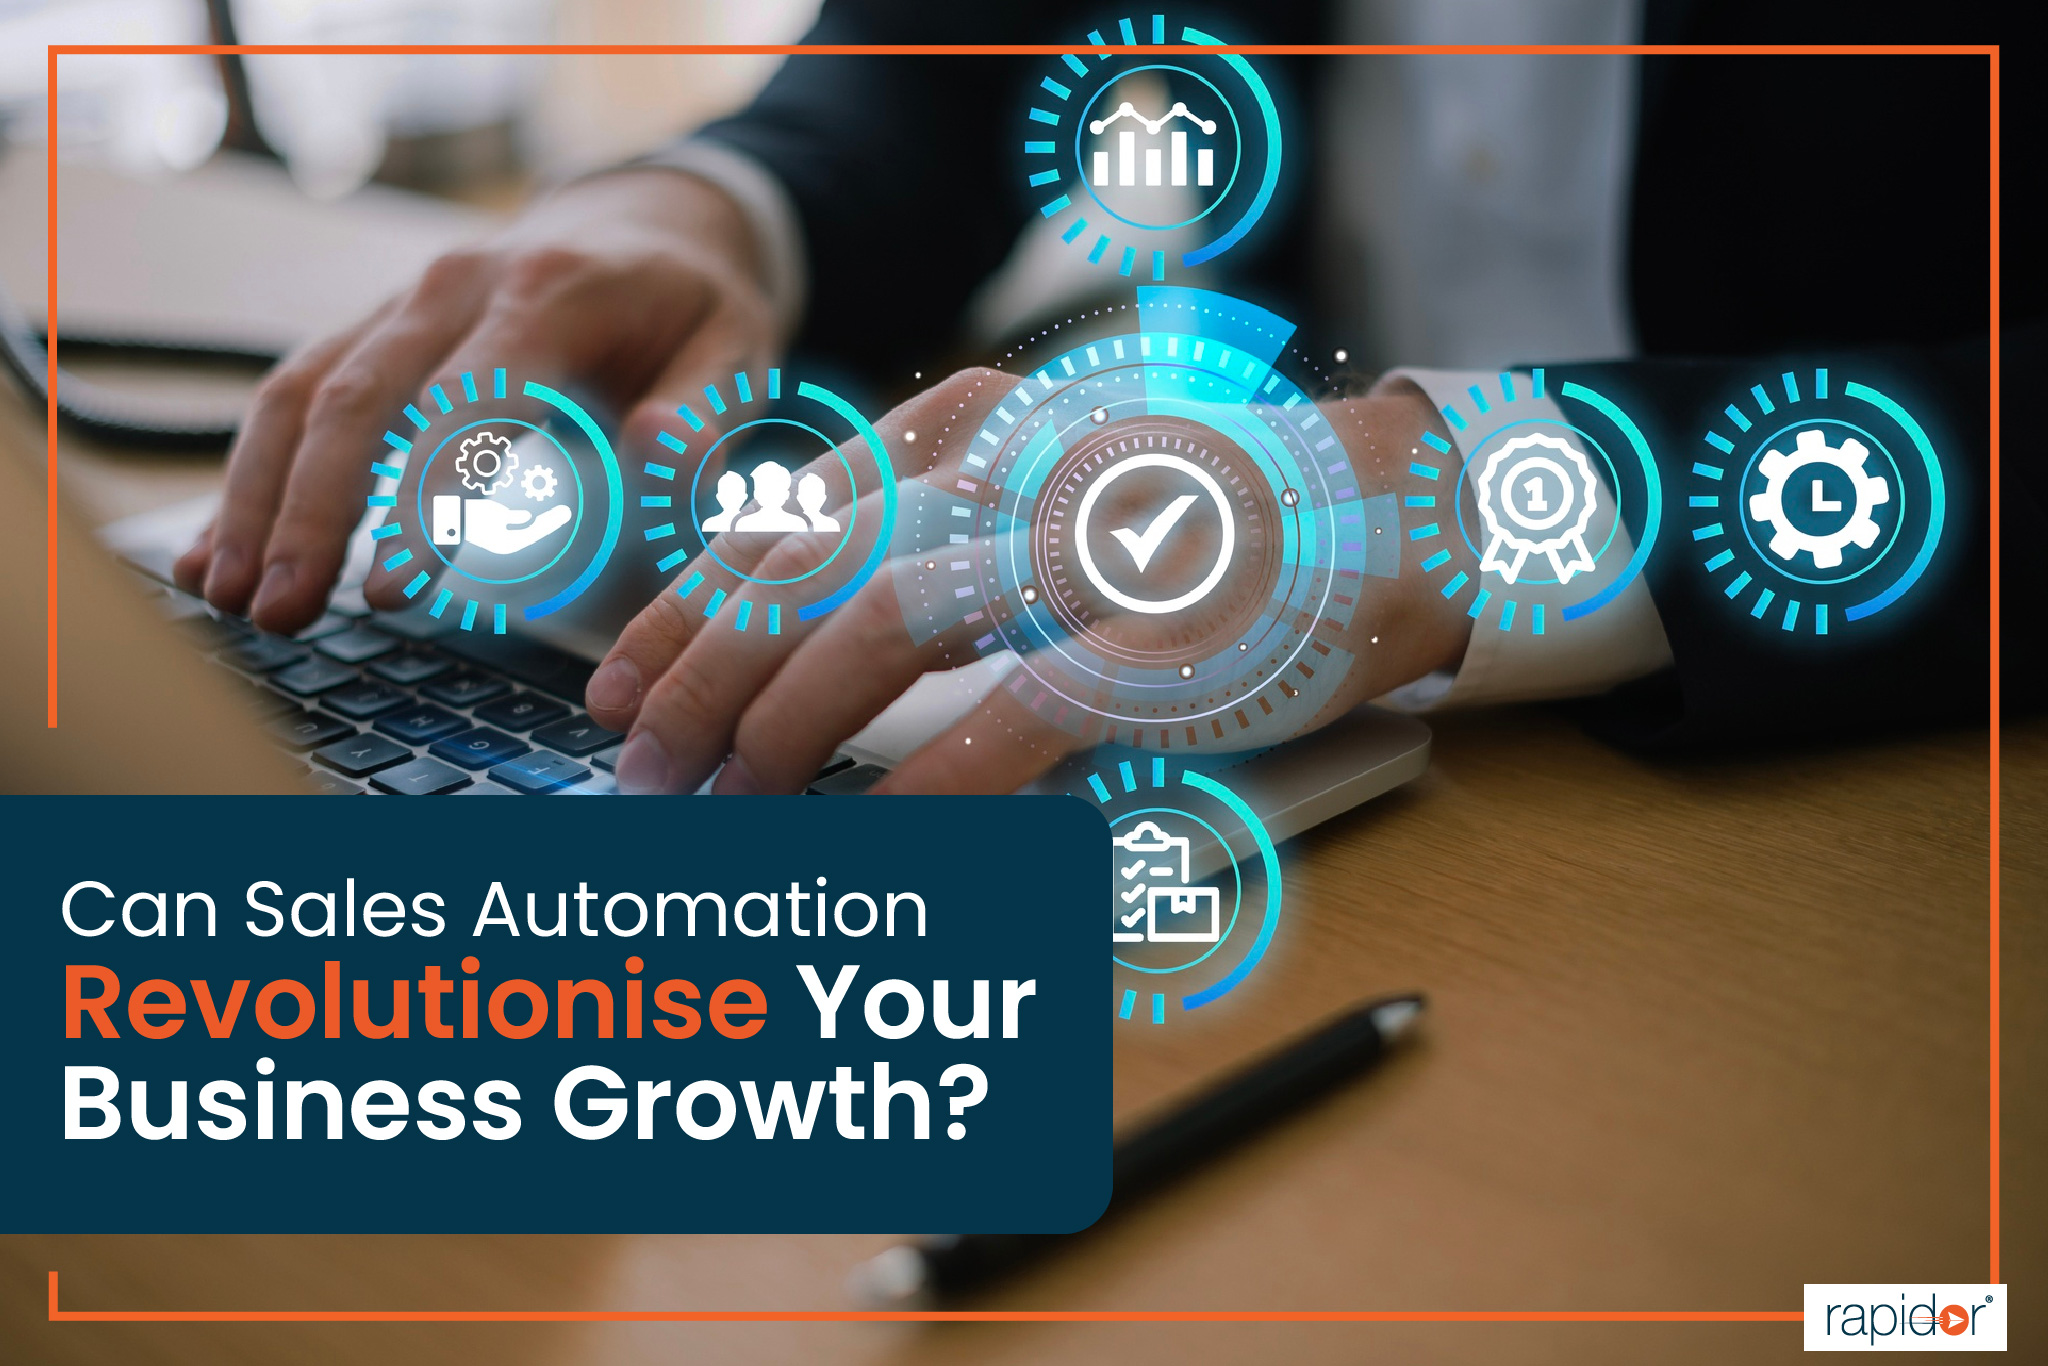 Sales Automation For Business Growth